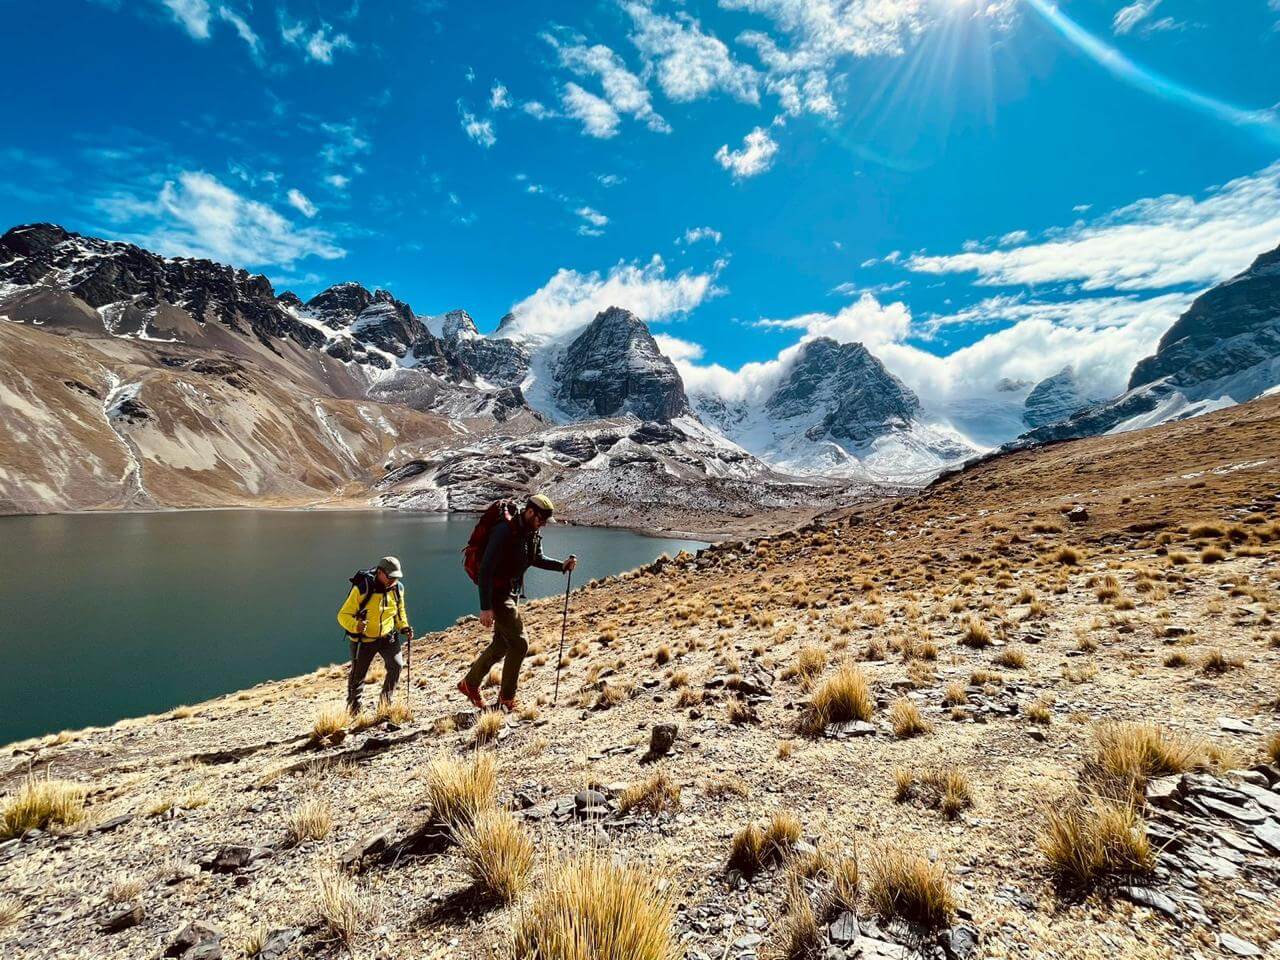 Master mountaineering on Pequeño Alpamayo and Huayna Potosi with the help of professional mountain guides. Extend your adventure to scale the majestic Illimani. Unforgettable mountaineering experiences await in Bolivia.